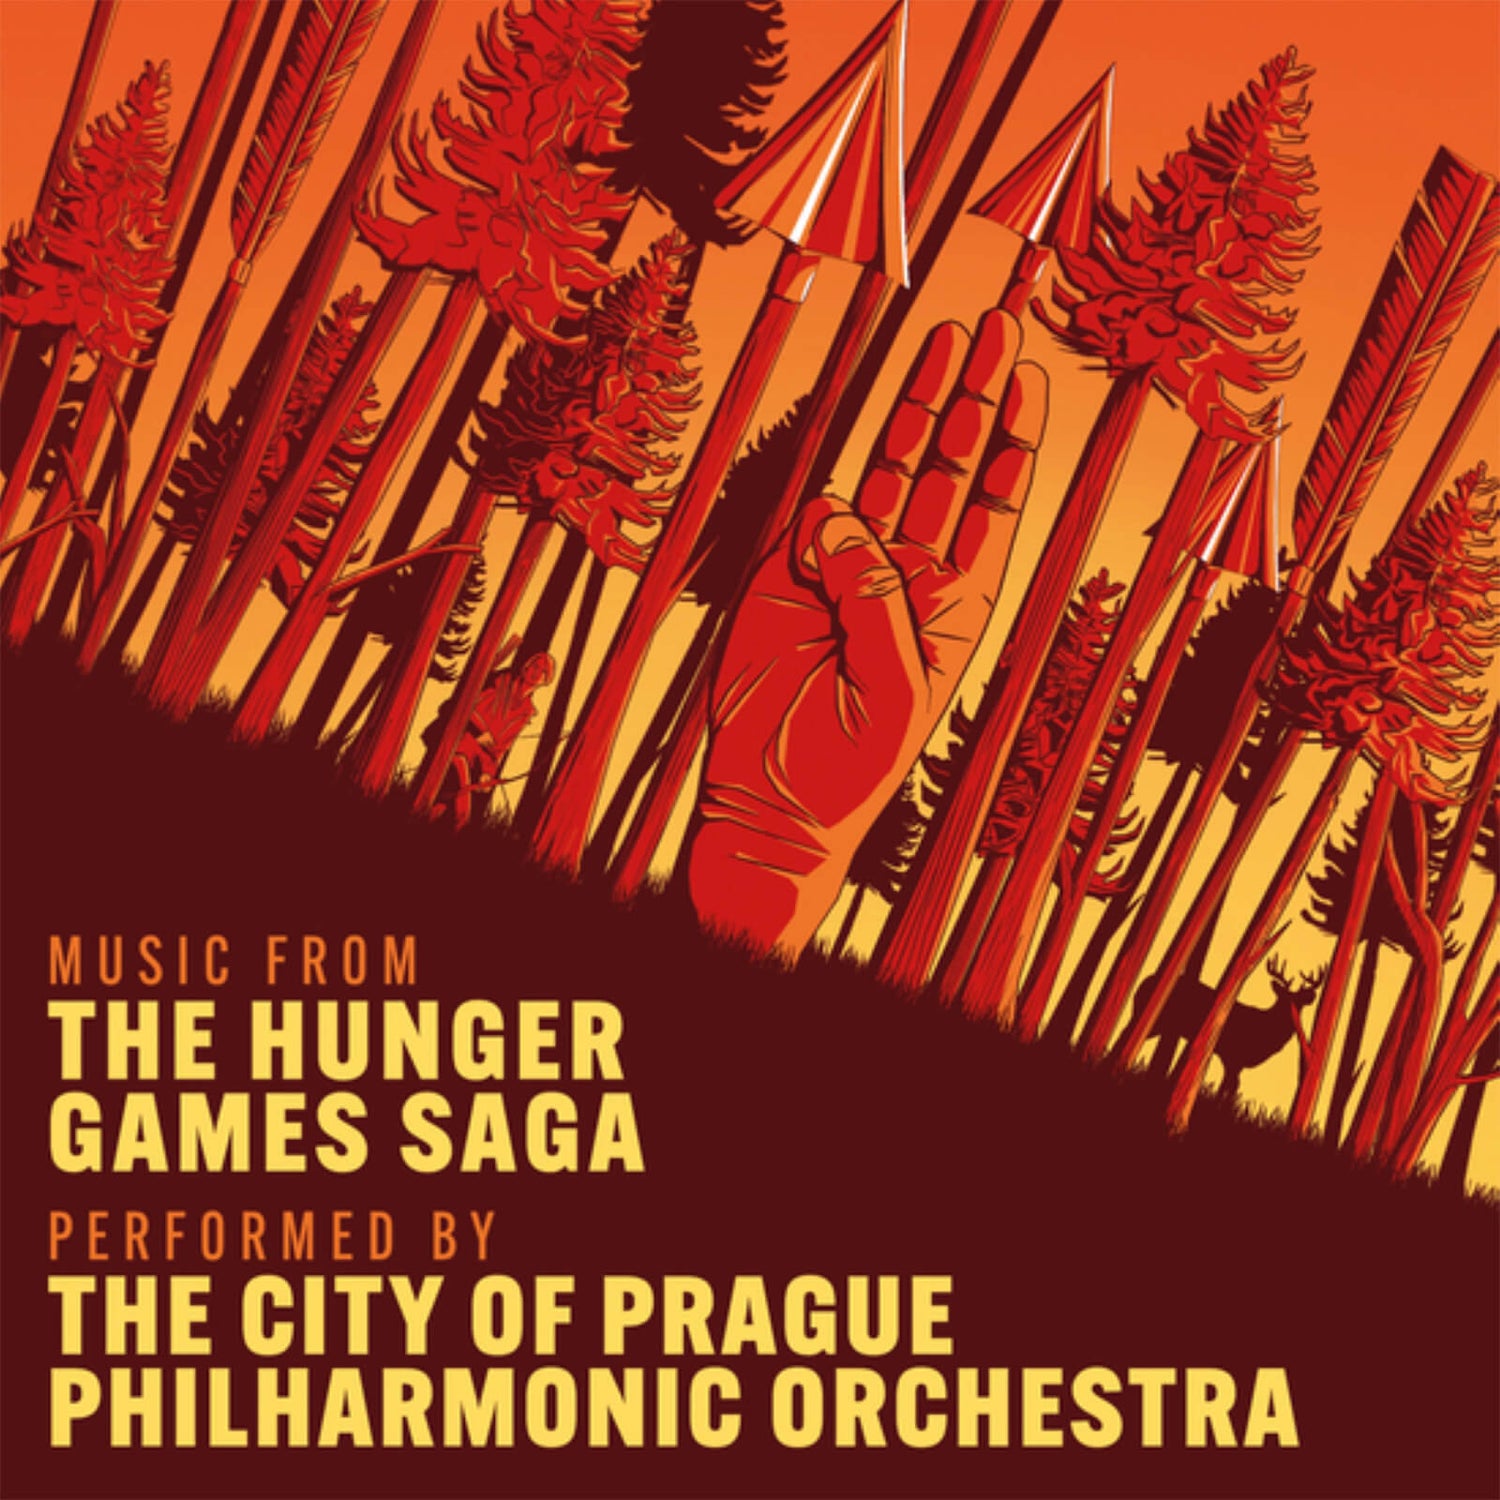 The City of Prague Philharmonic Orchestra - Music from The Hunger Games Saga Vinyl